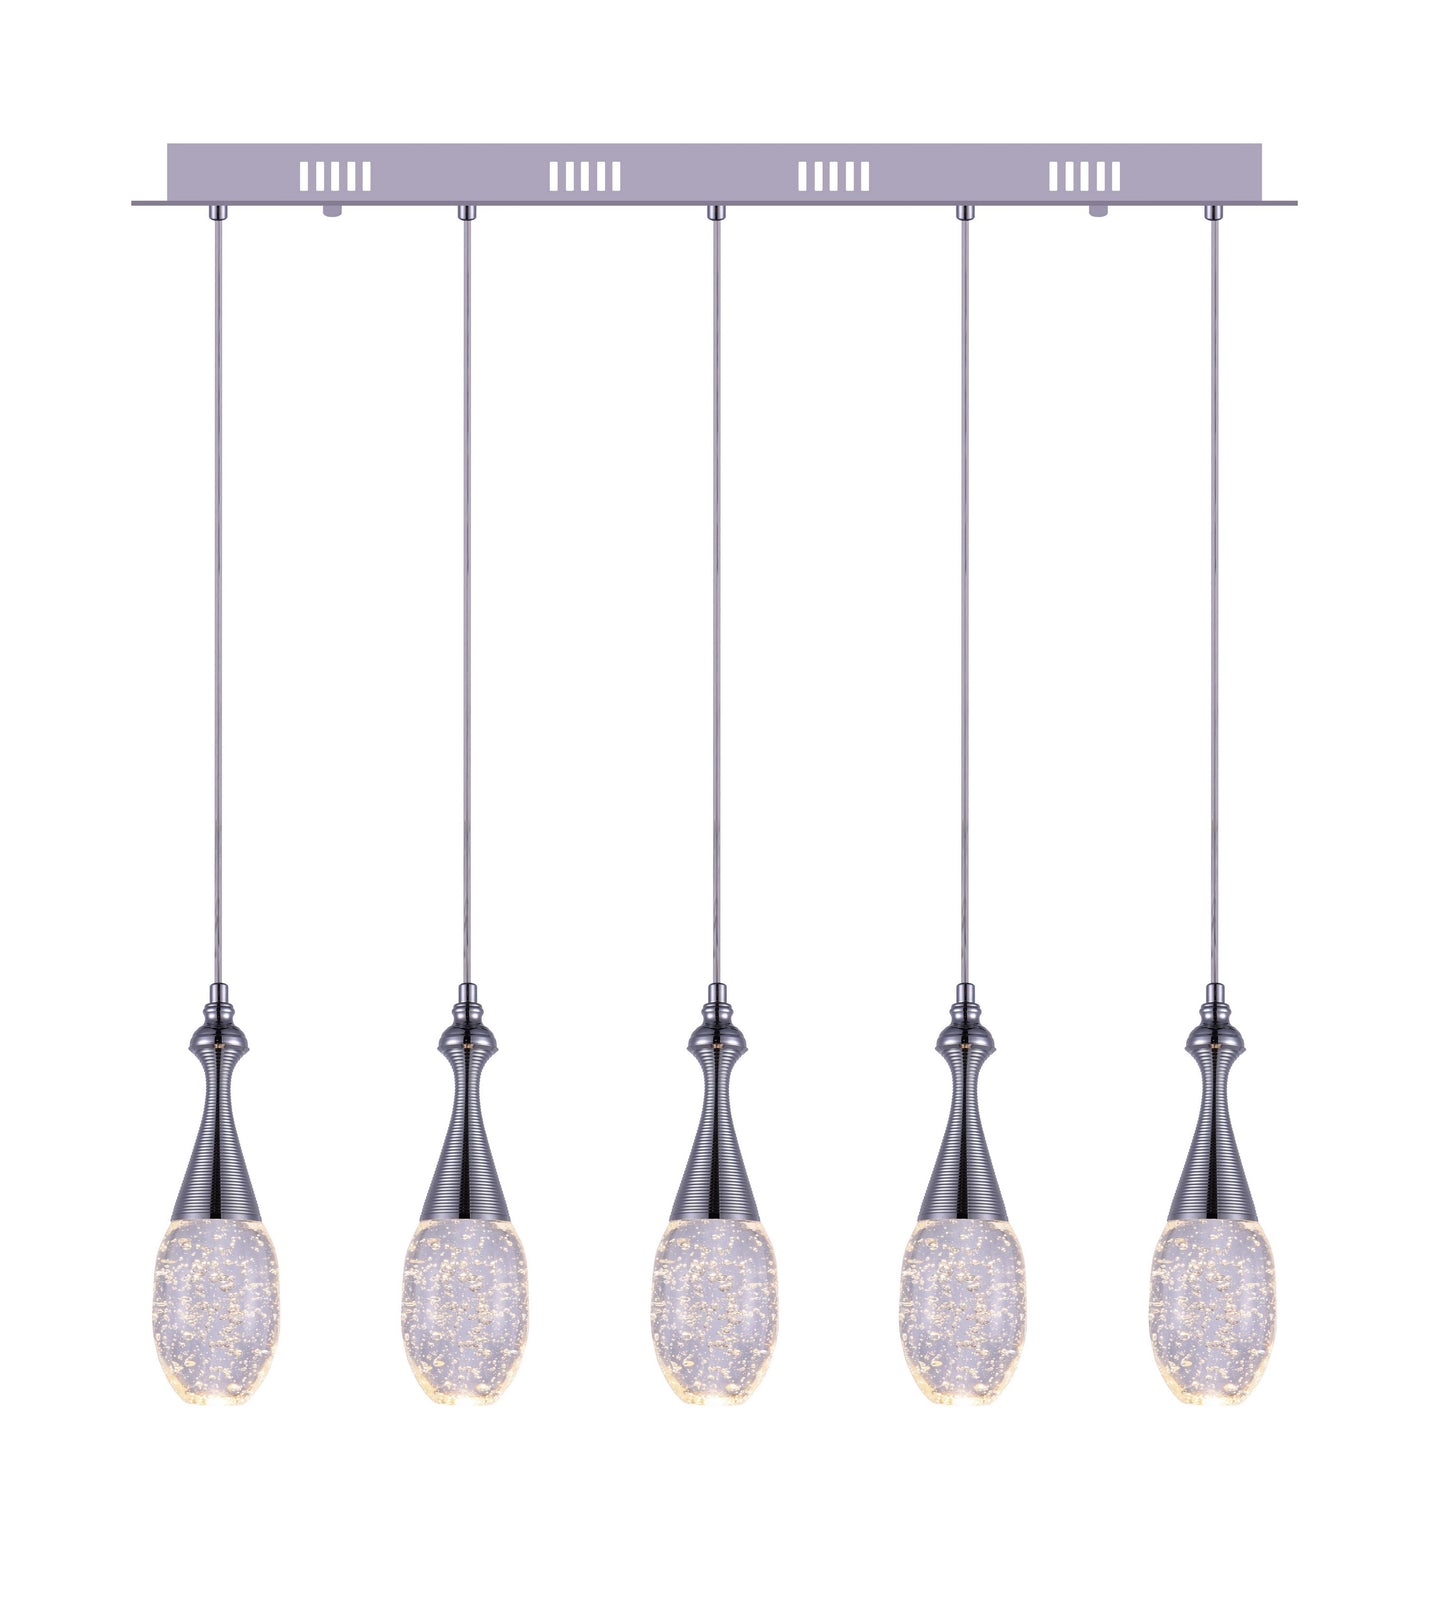 LED MULTI POINT PENDANT WITH CHROME FINISH - Dreamart Gallery